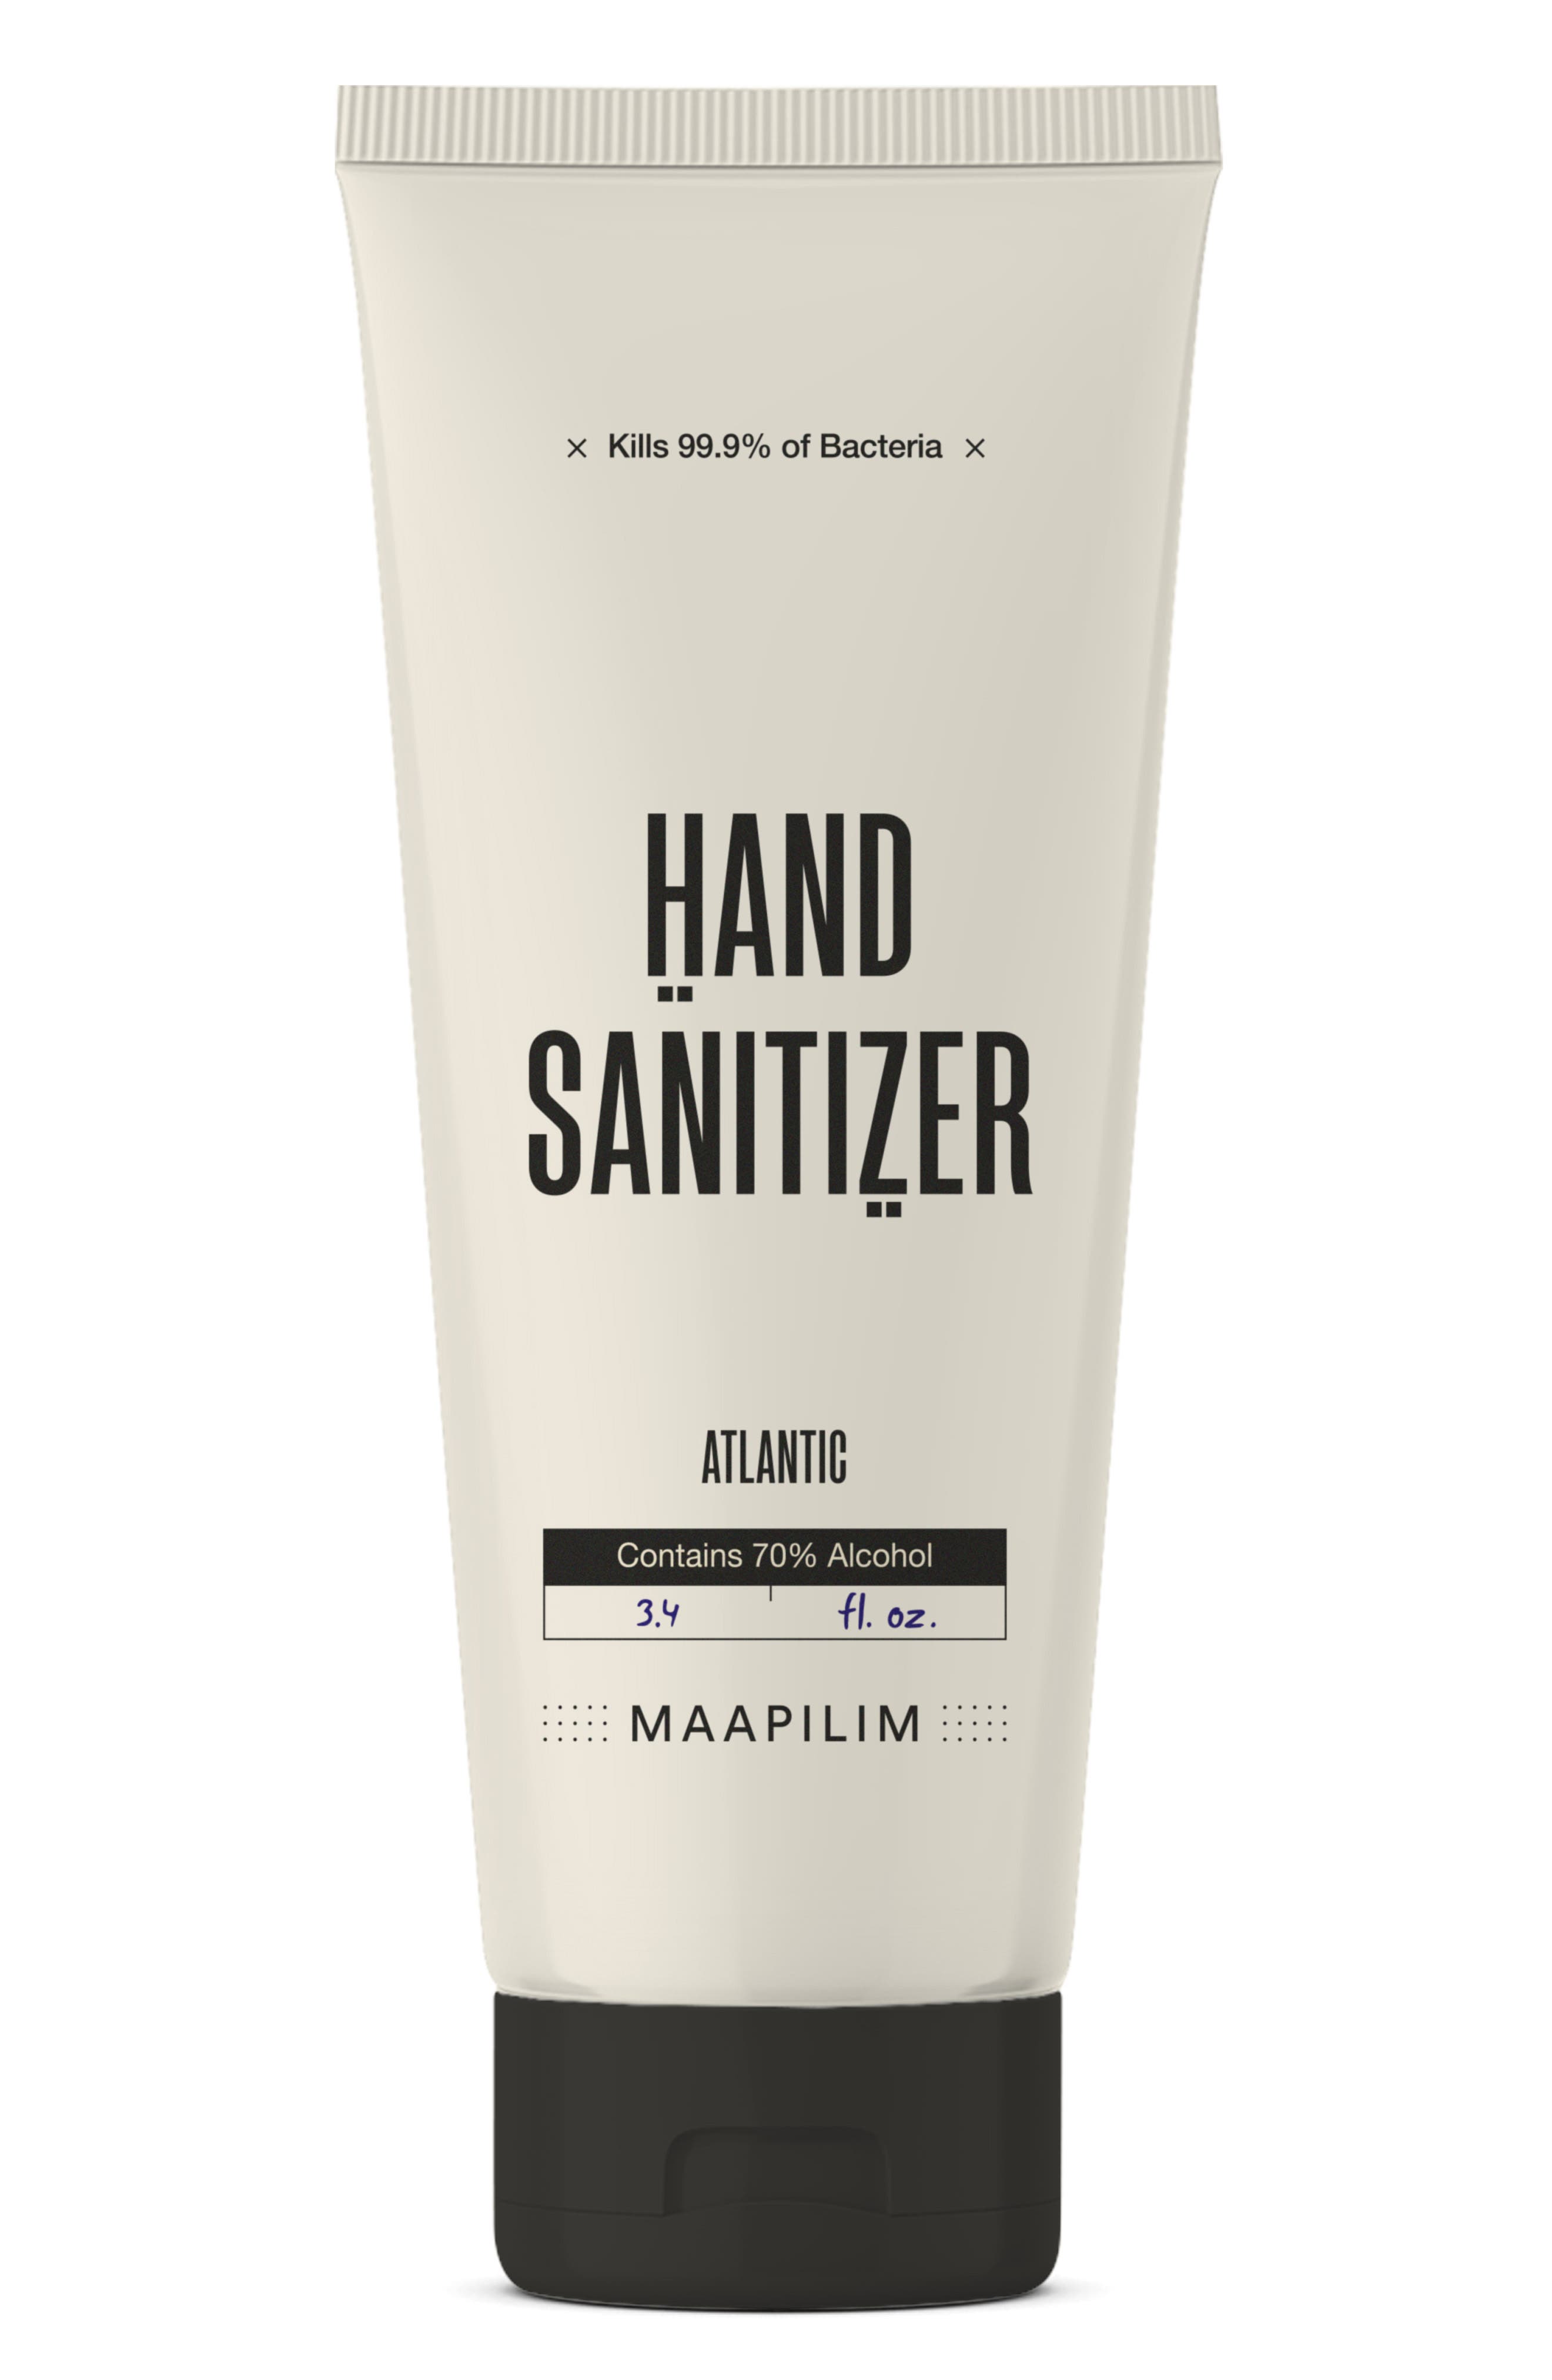 MAAPILIM 70% Alcohol Hand Sanitizer at Nordstrom